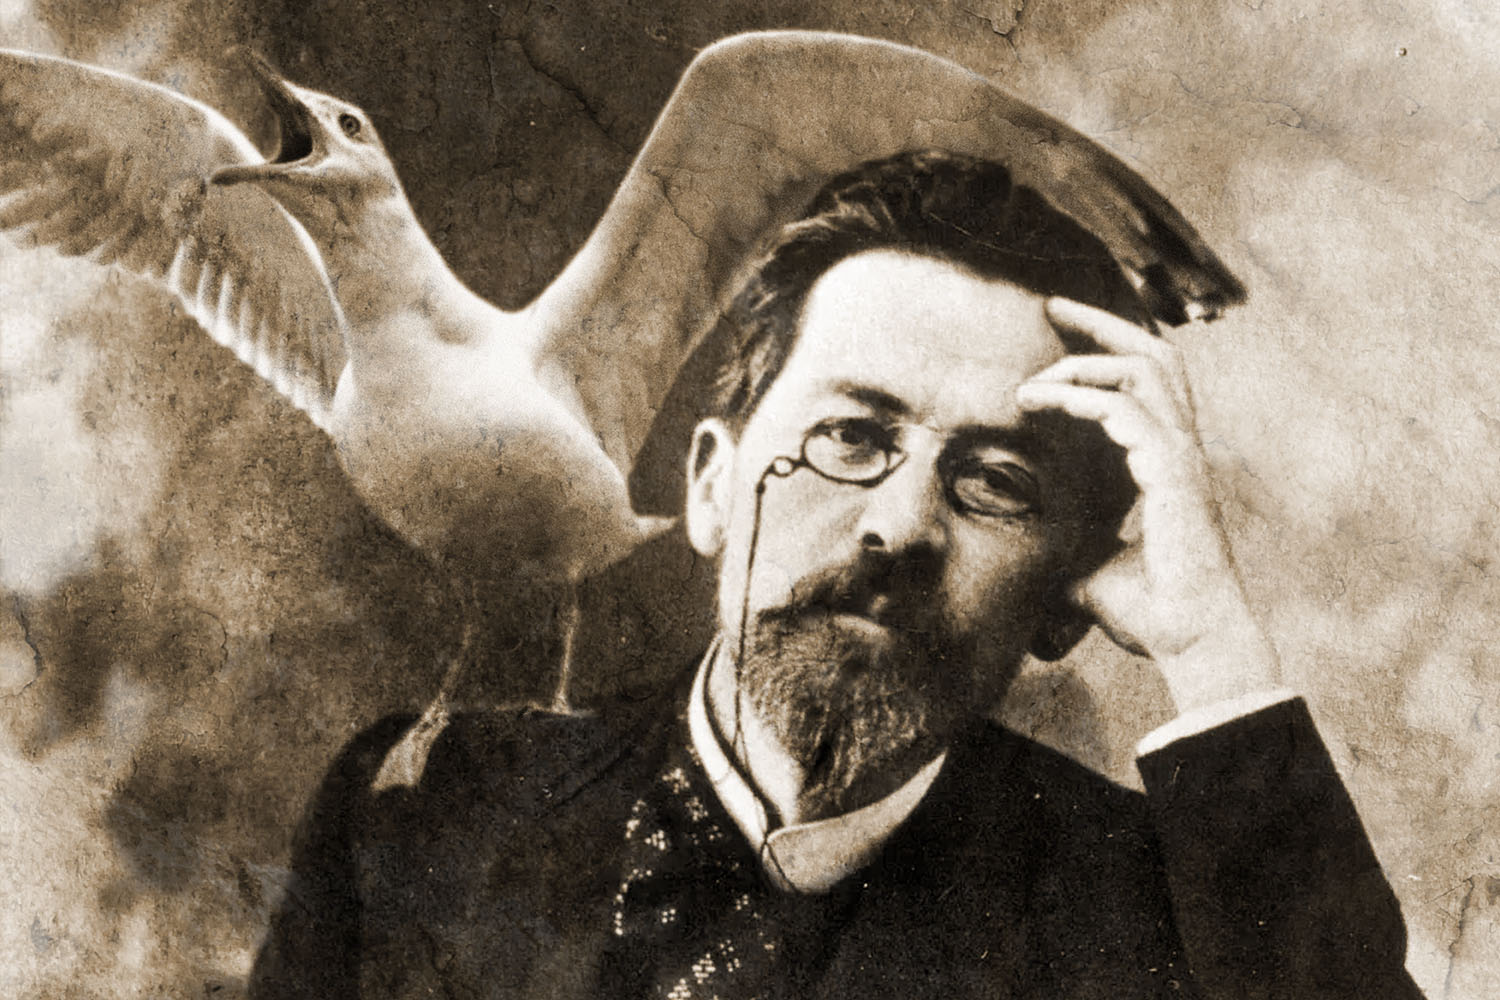 artwork for theatre production, bird sitting on a man's shoulder